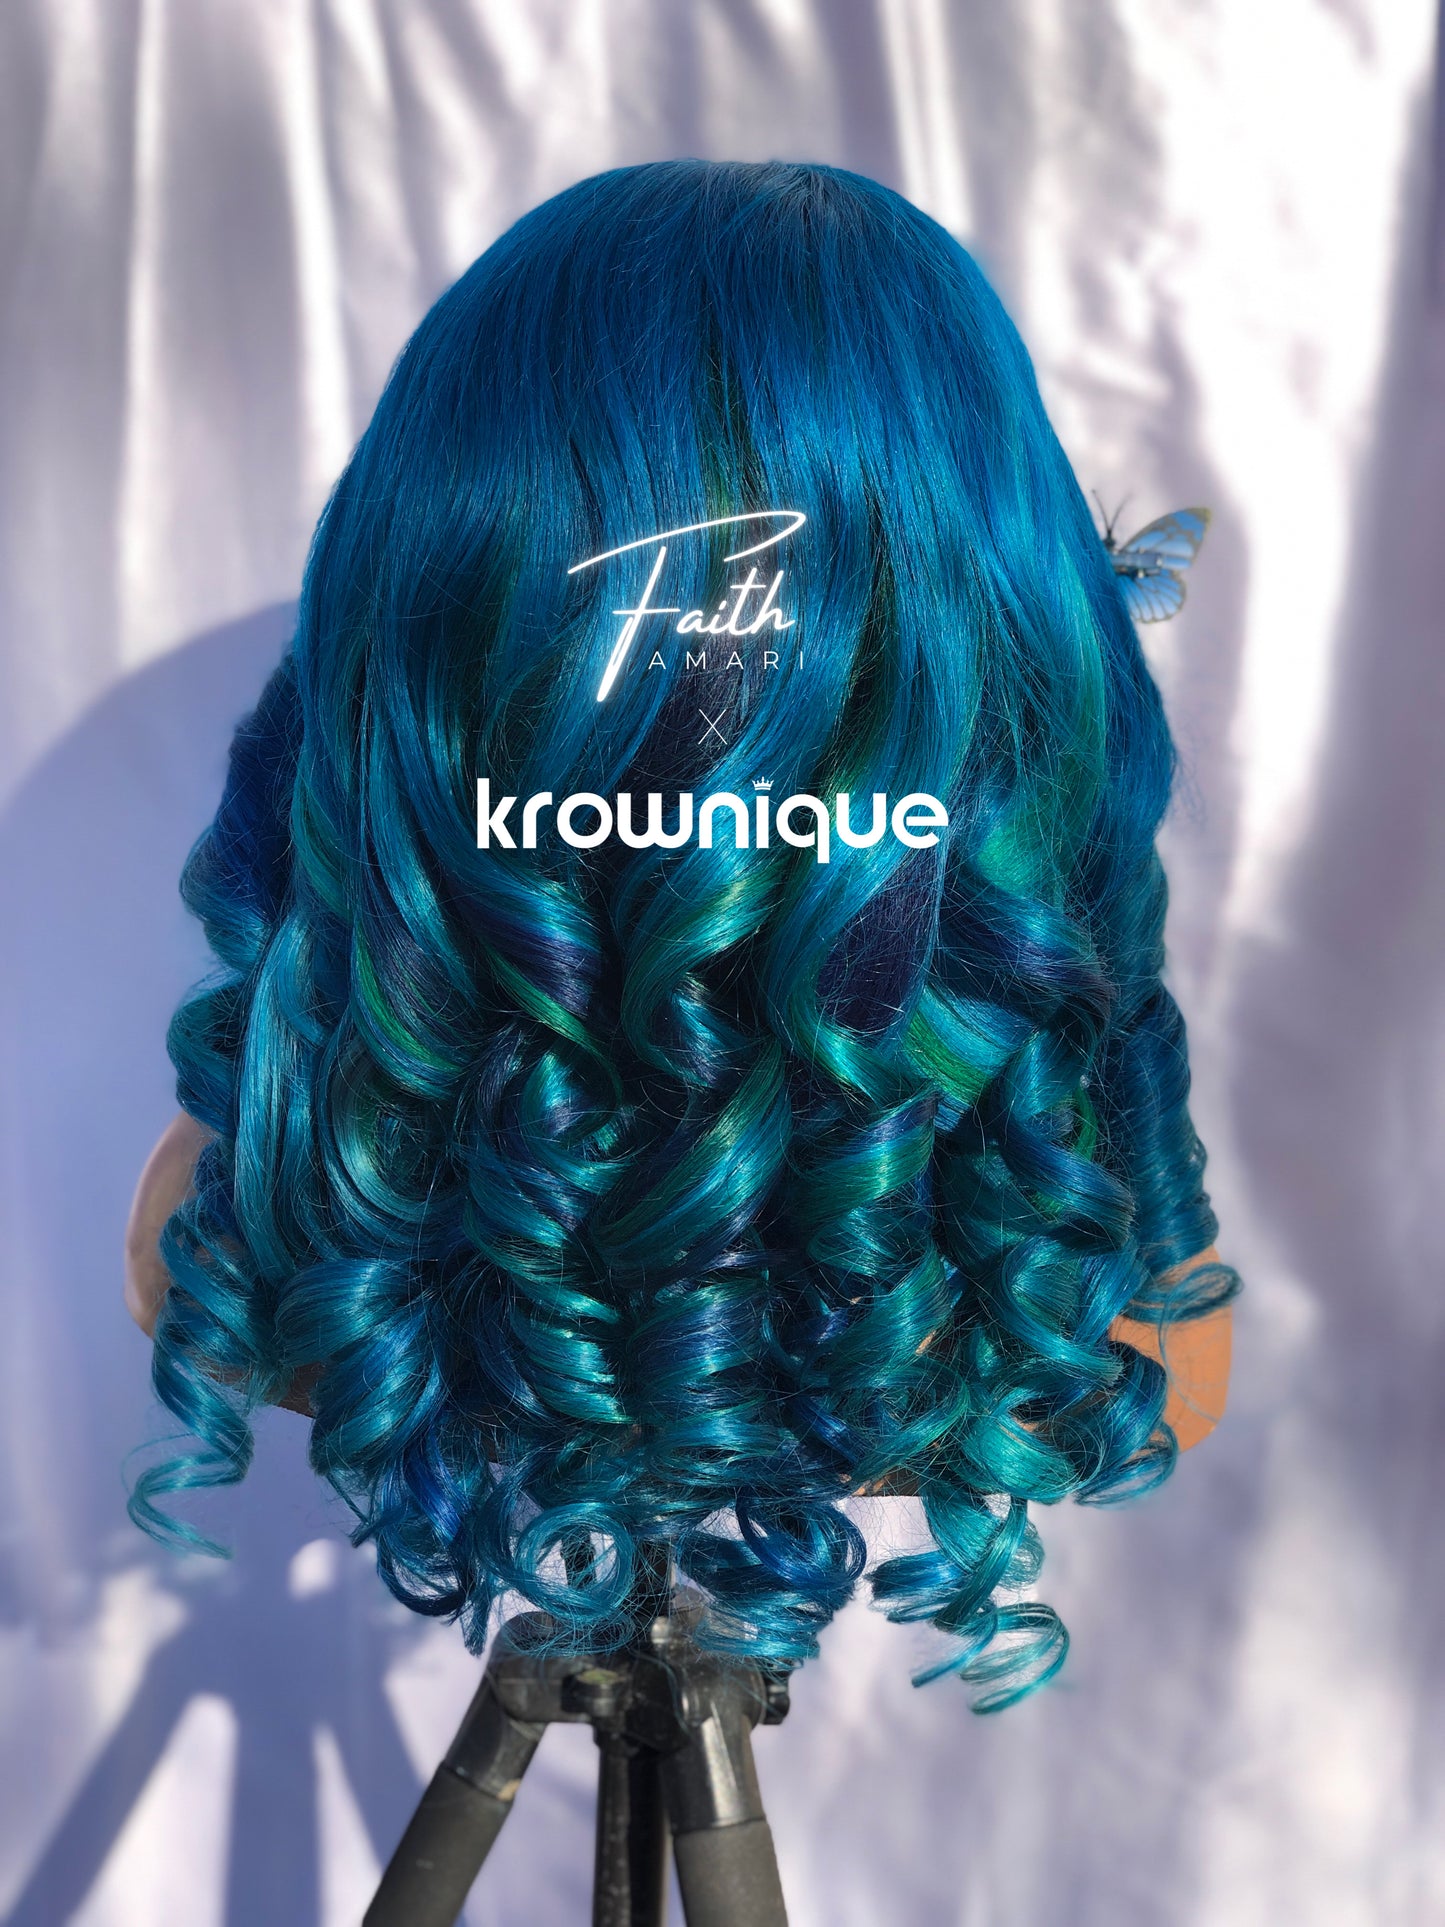 Complex Butterfly Wig | Limited Edition with Signed CD | Krownique LLC